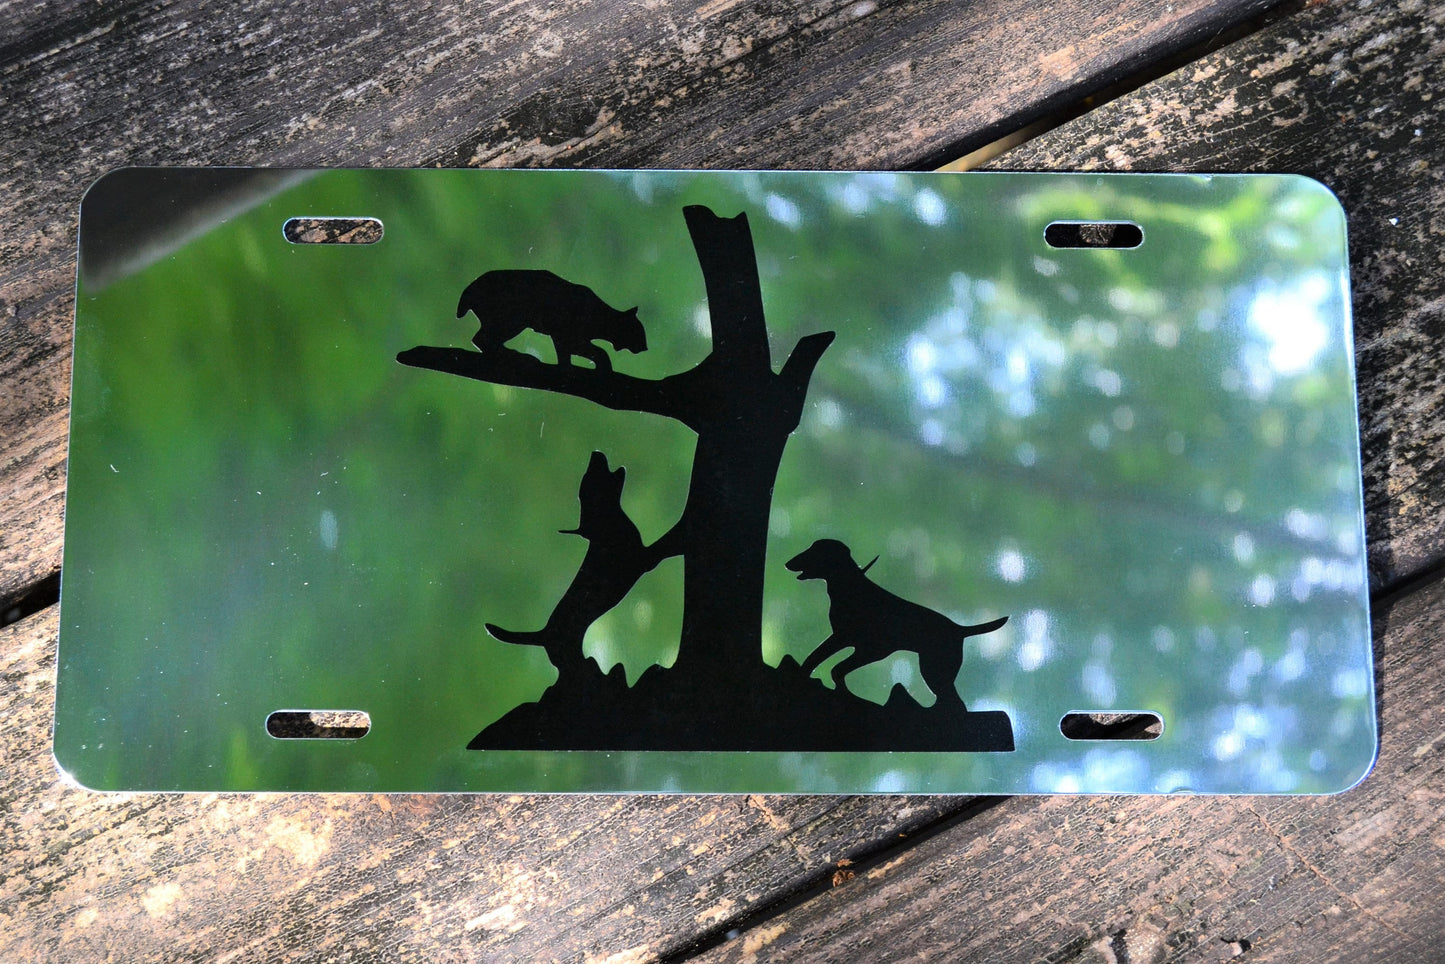 Hunting Bobcat Hounds Treed Hunting Mirrored License Plate